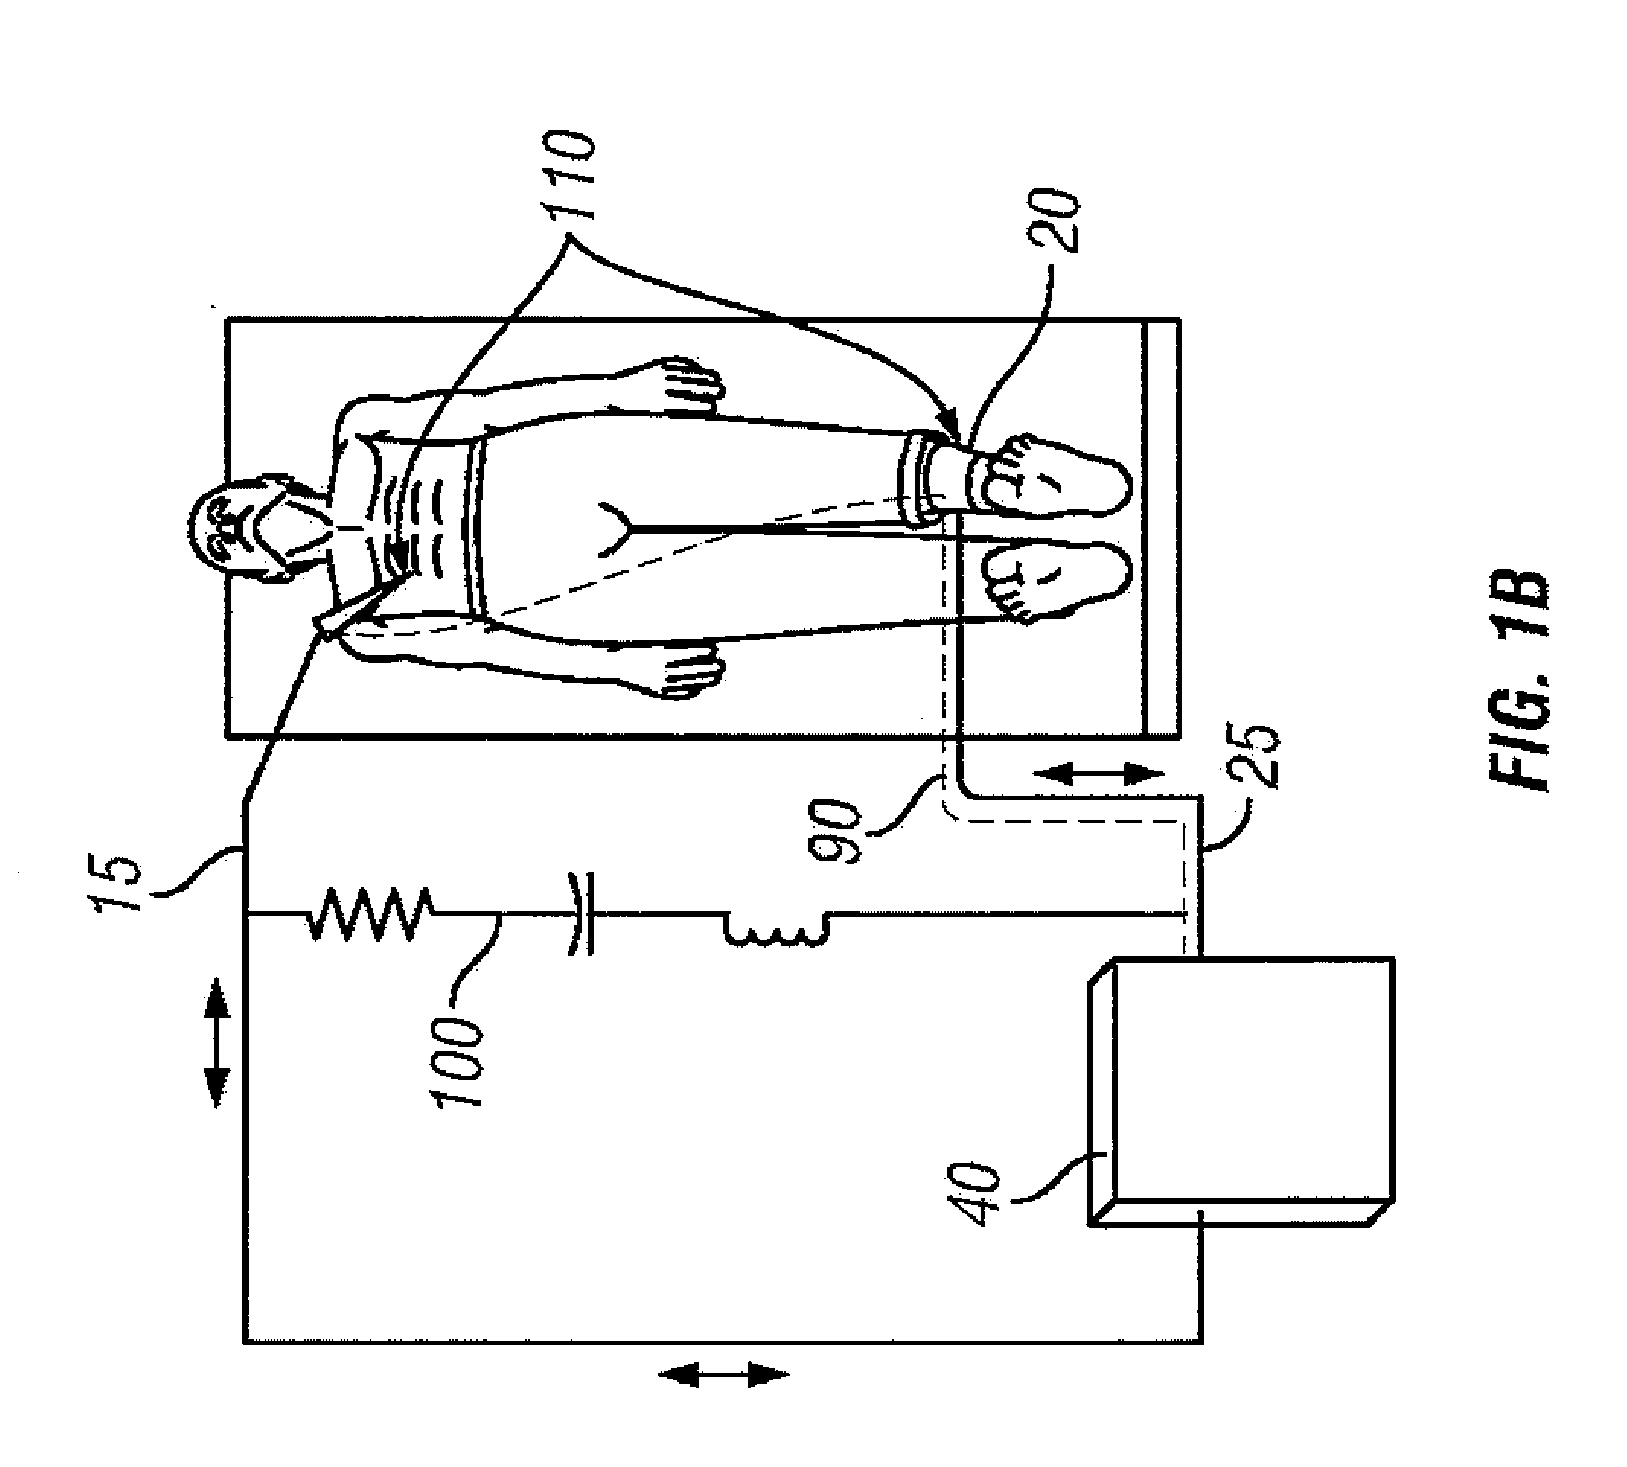 Connection of a bipolar electrosurgical hand piece to a monopolar output of an electrosurgical generator